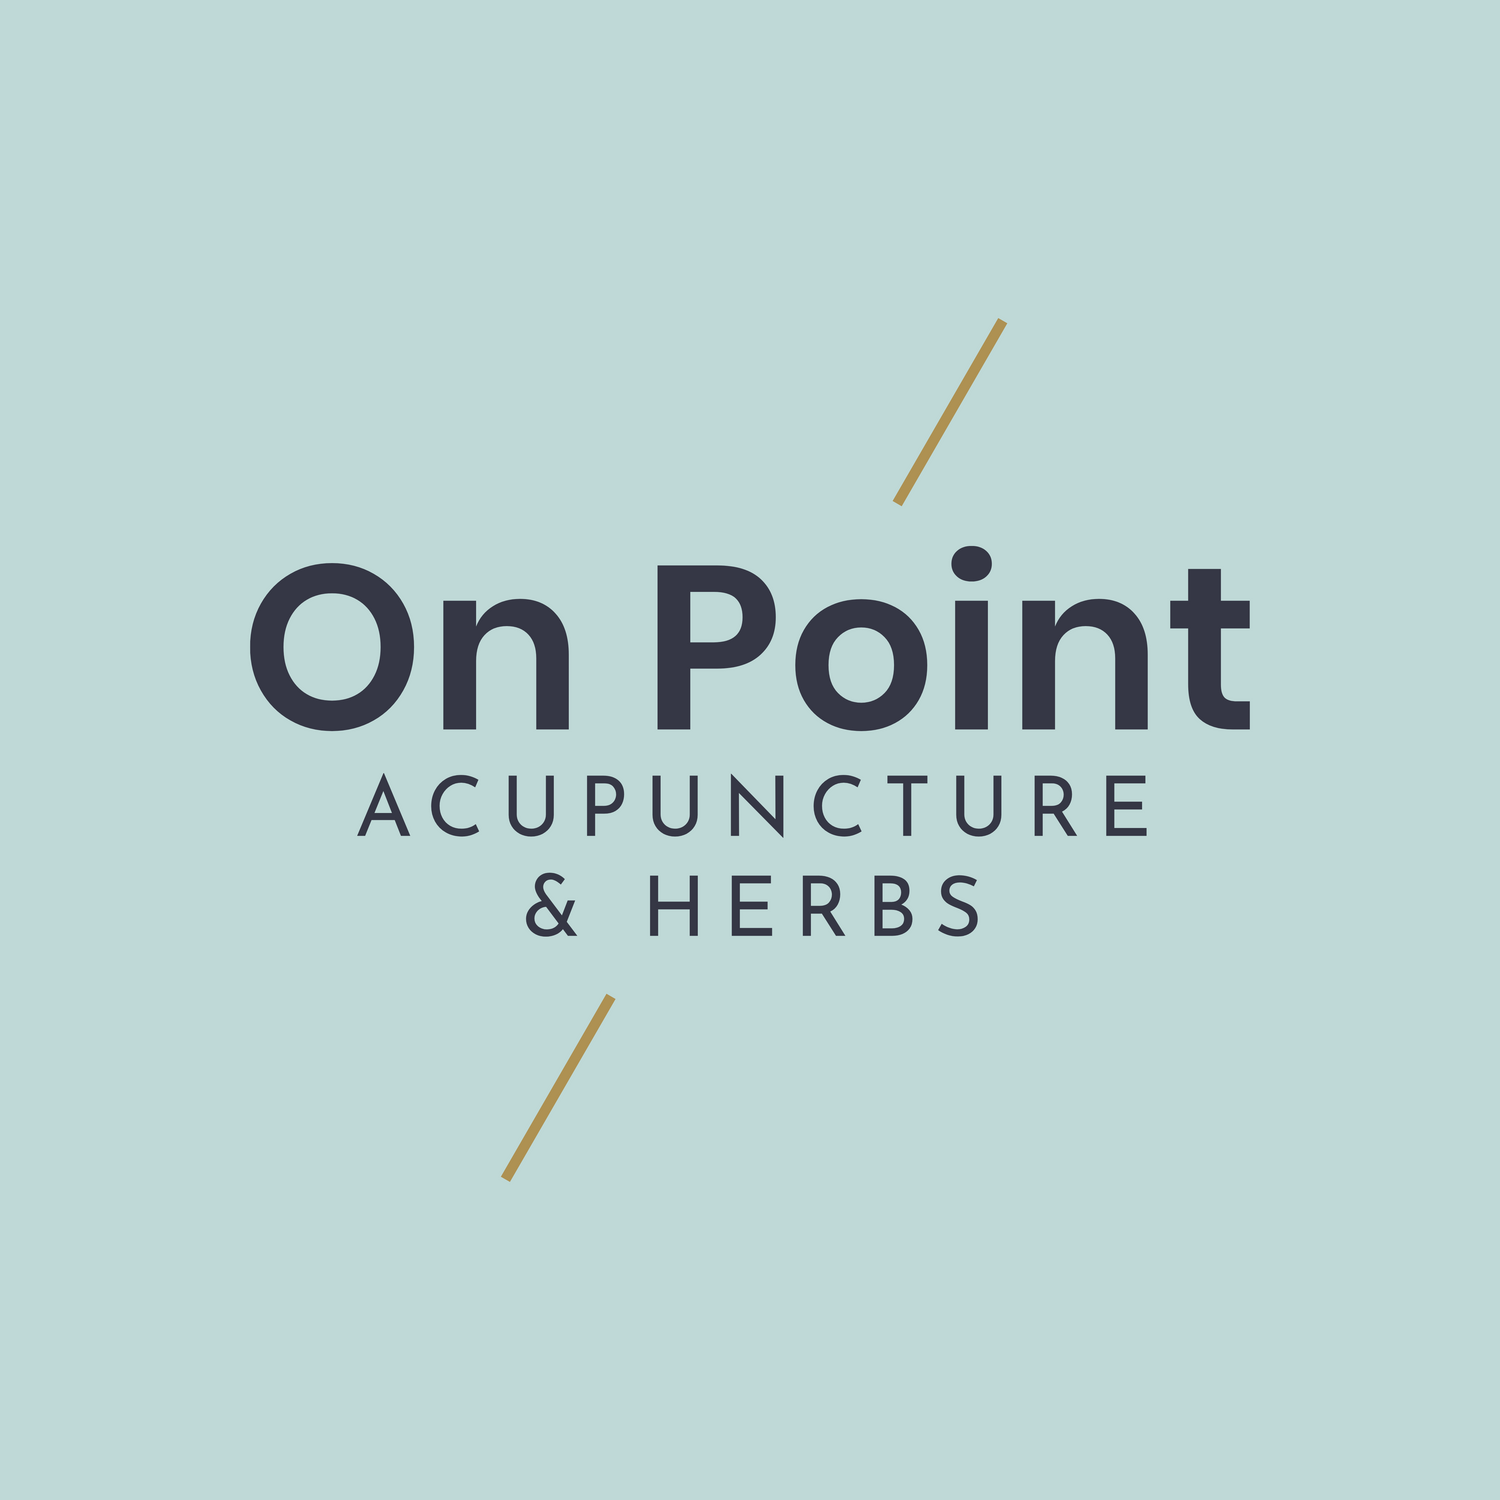 Gallery Photo of Welcome to On Point Acupuncture & Herbs! We specialize in pain management, women's health, and hospice/palliative care.